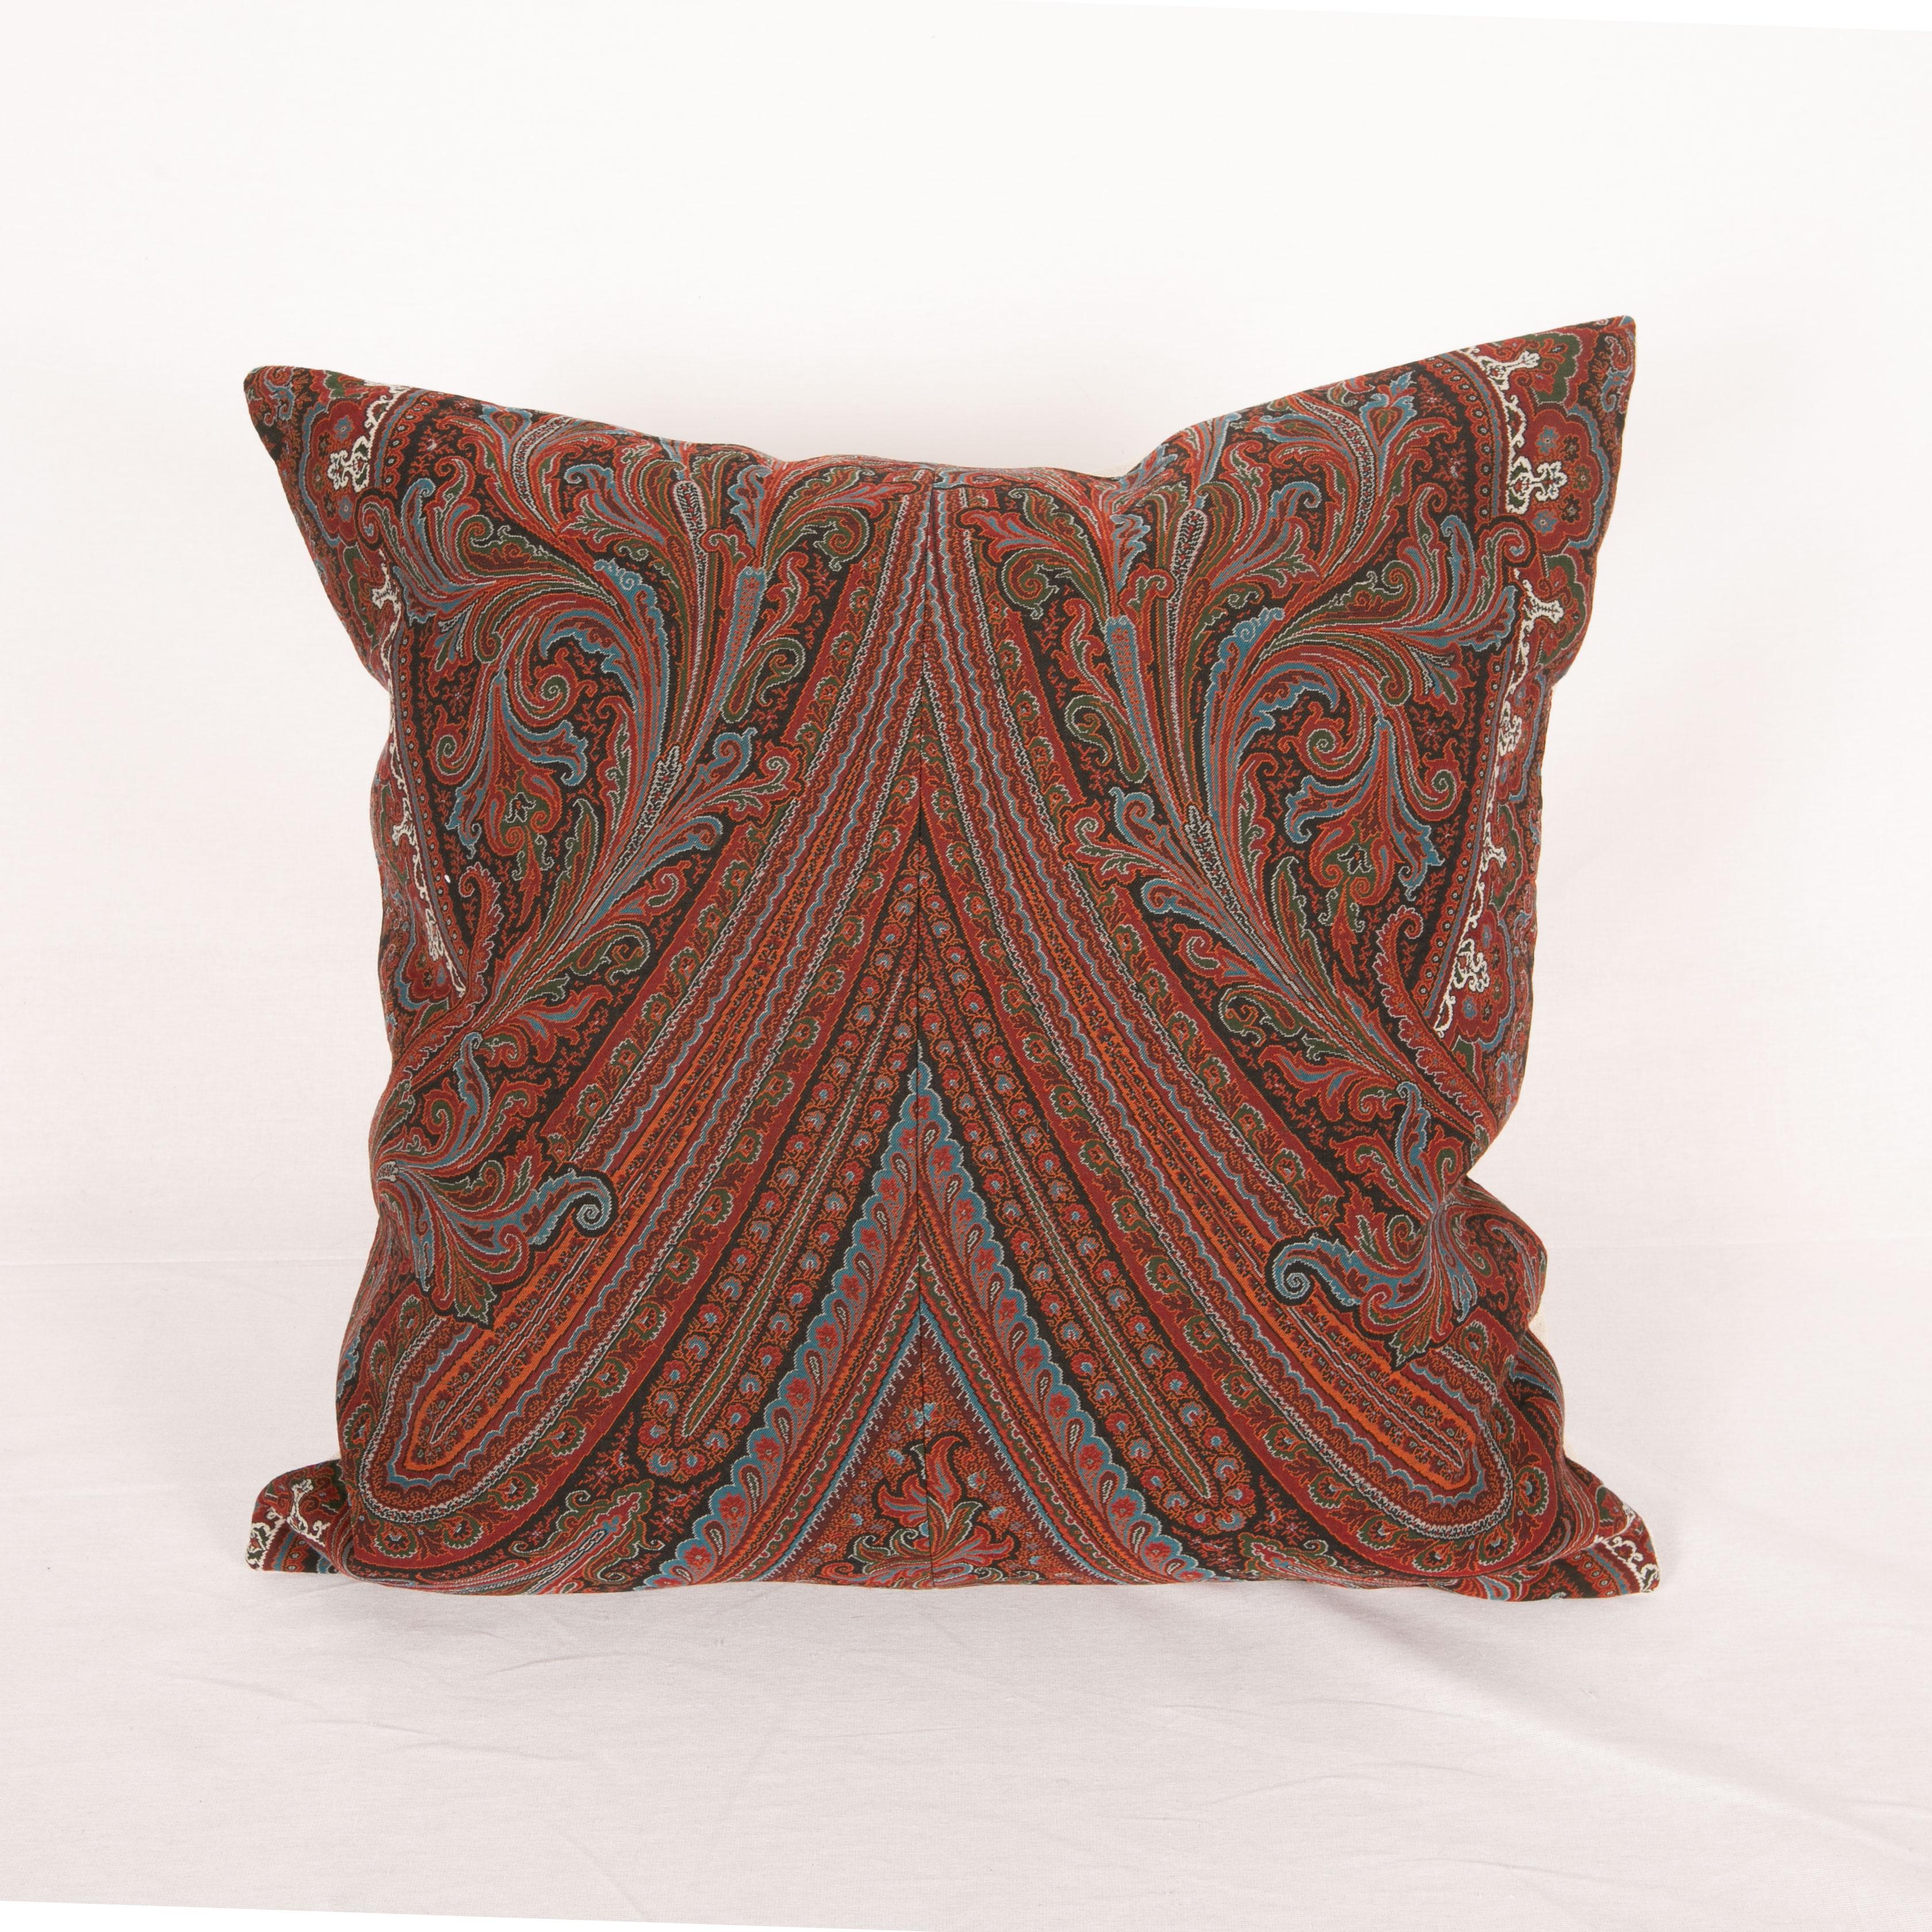 Pillow case is made from a European Paisley Shawl.
It does not come with an insert .
Linen in the back.
Zipper closure
Dry clean is recommended.